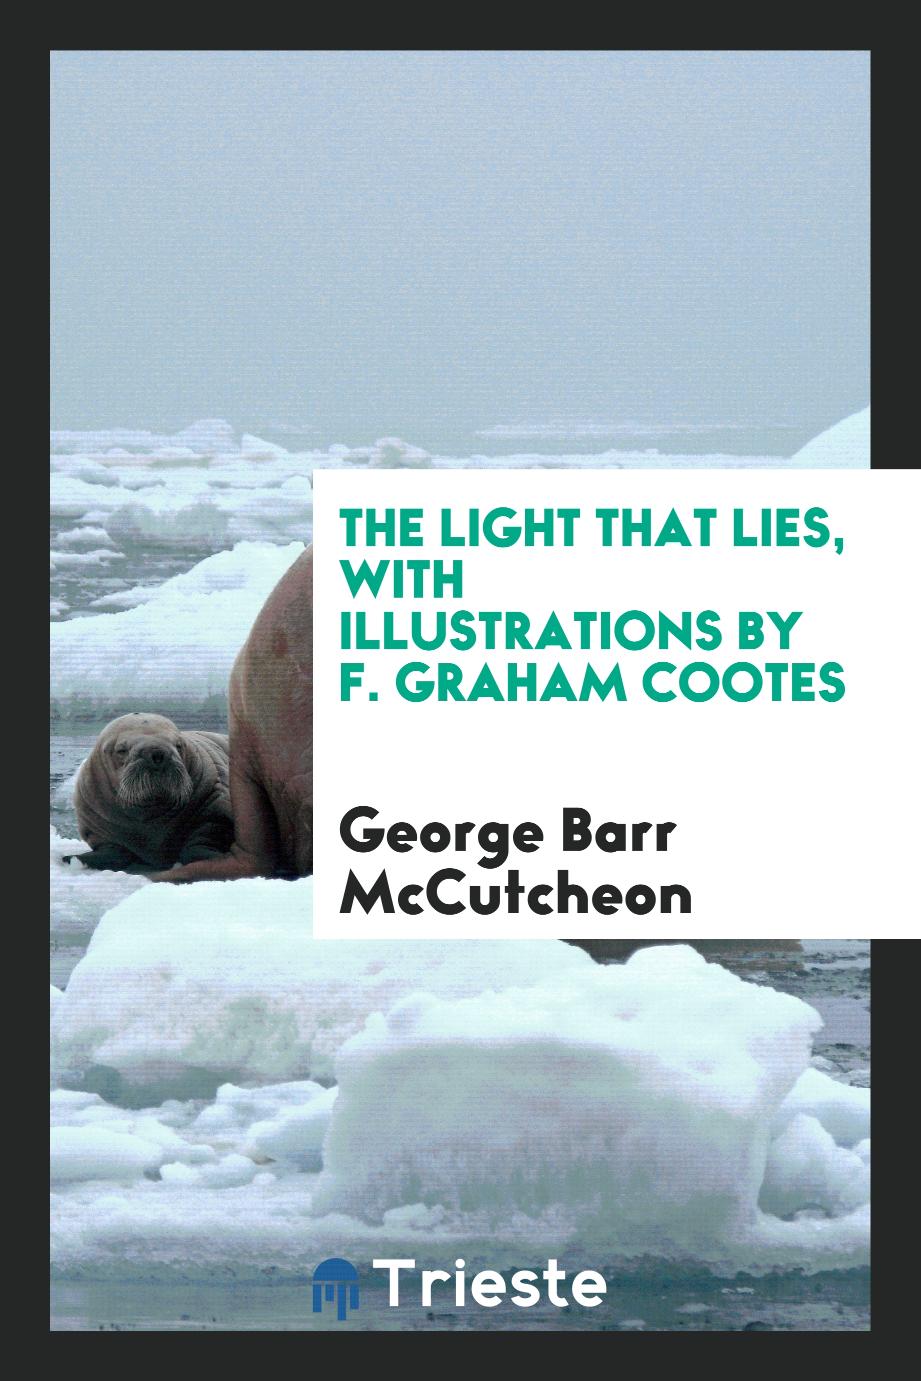 The Light That Lies, with Illustrations by F. Graham Cootes